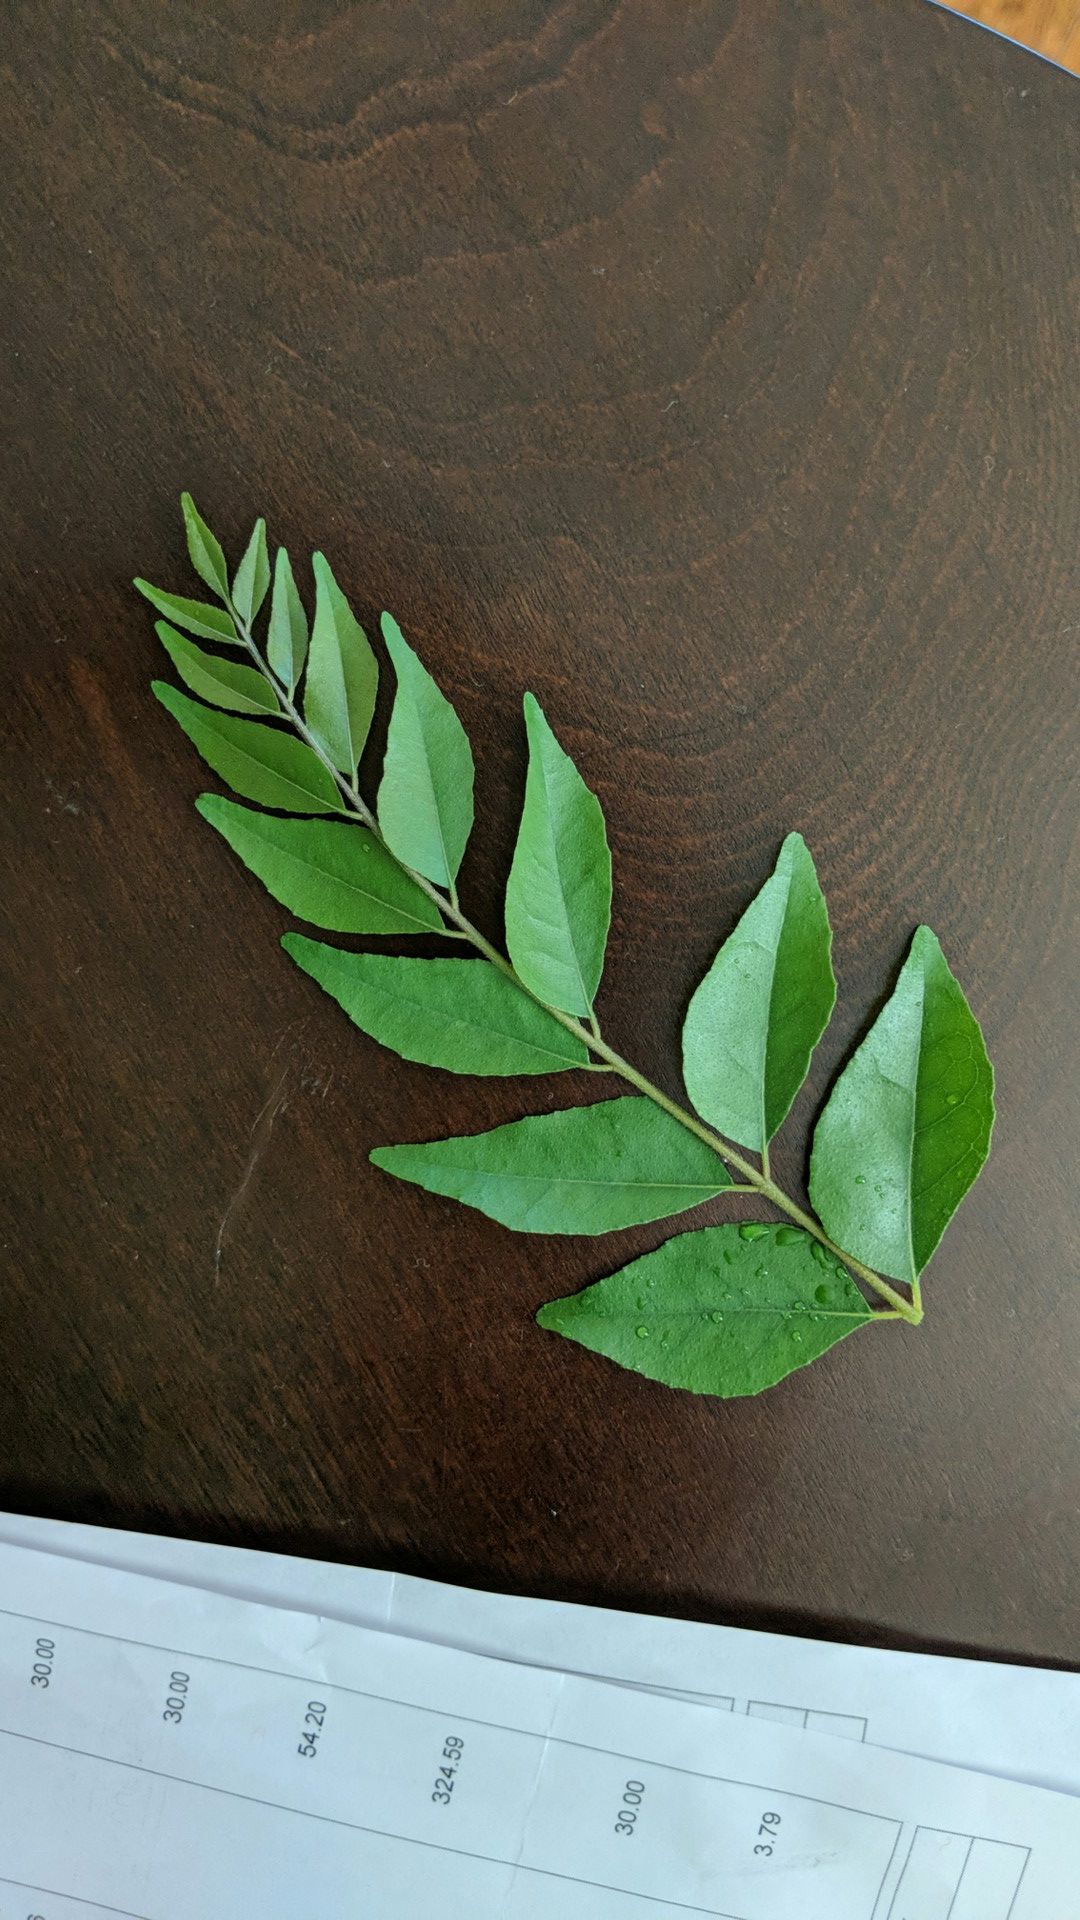 Freshly plucked curry plant leaves کڑھی پتا